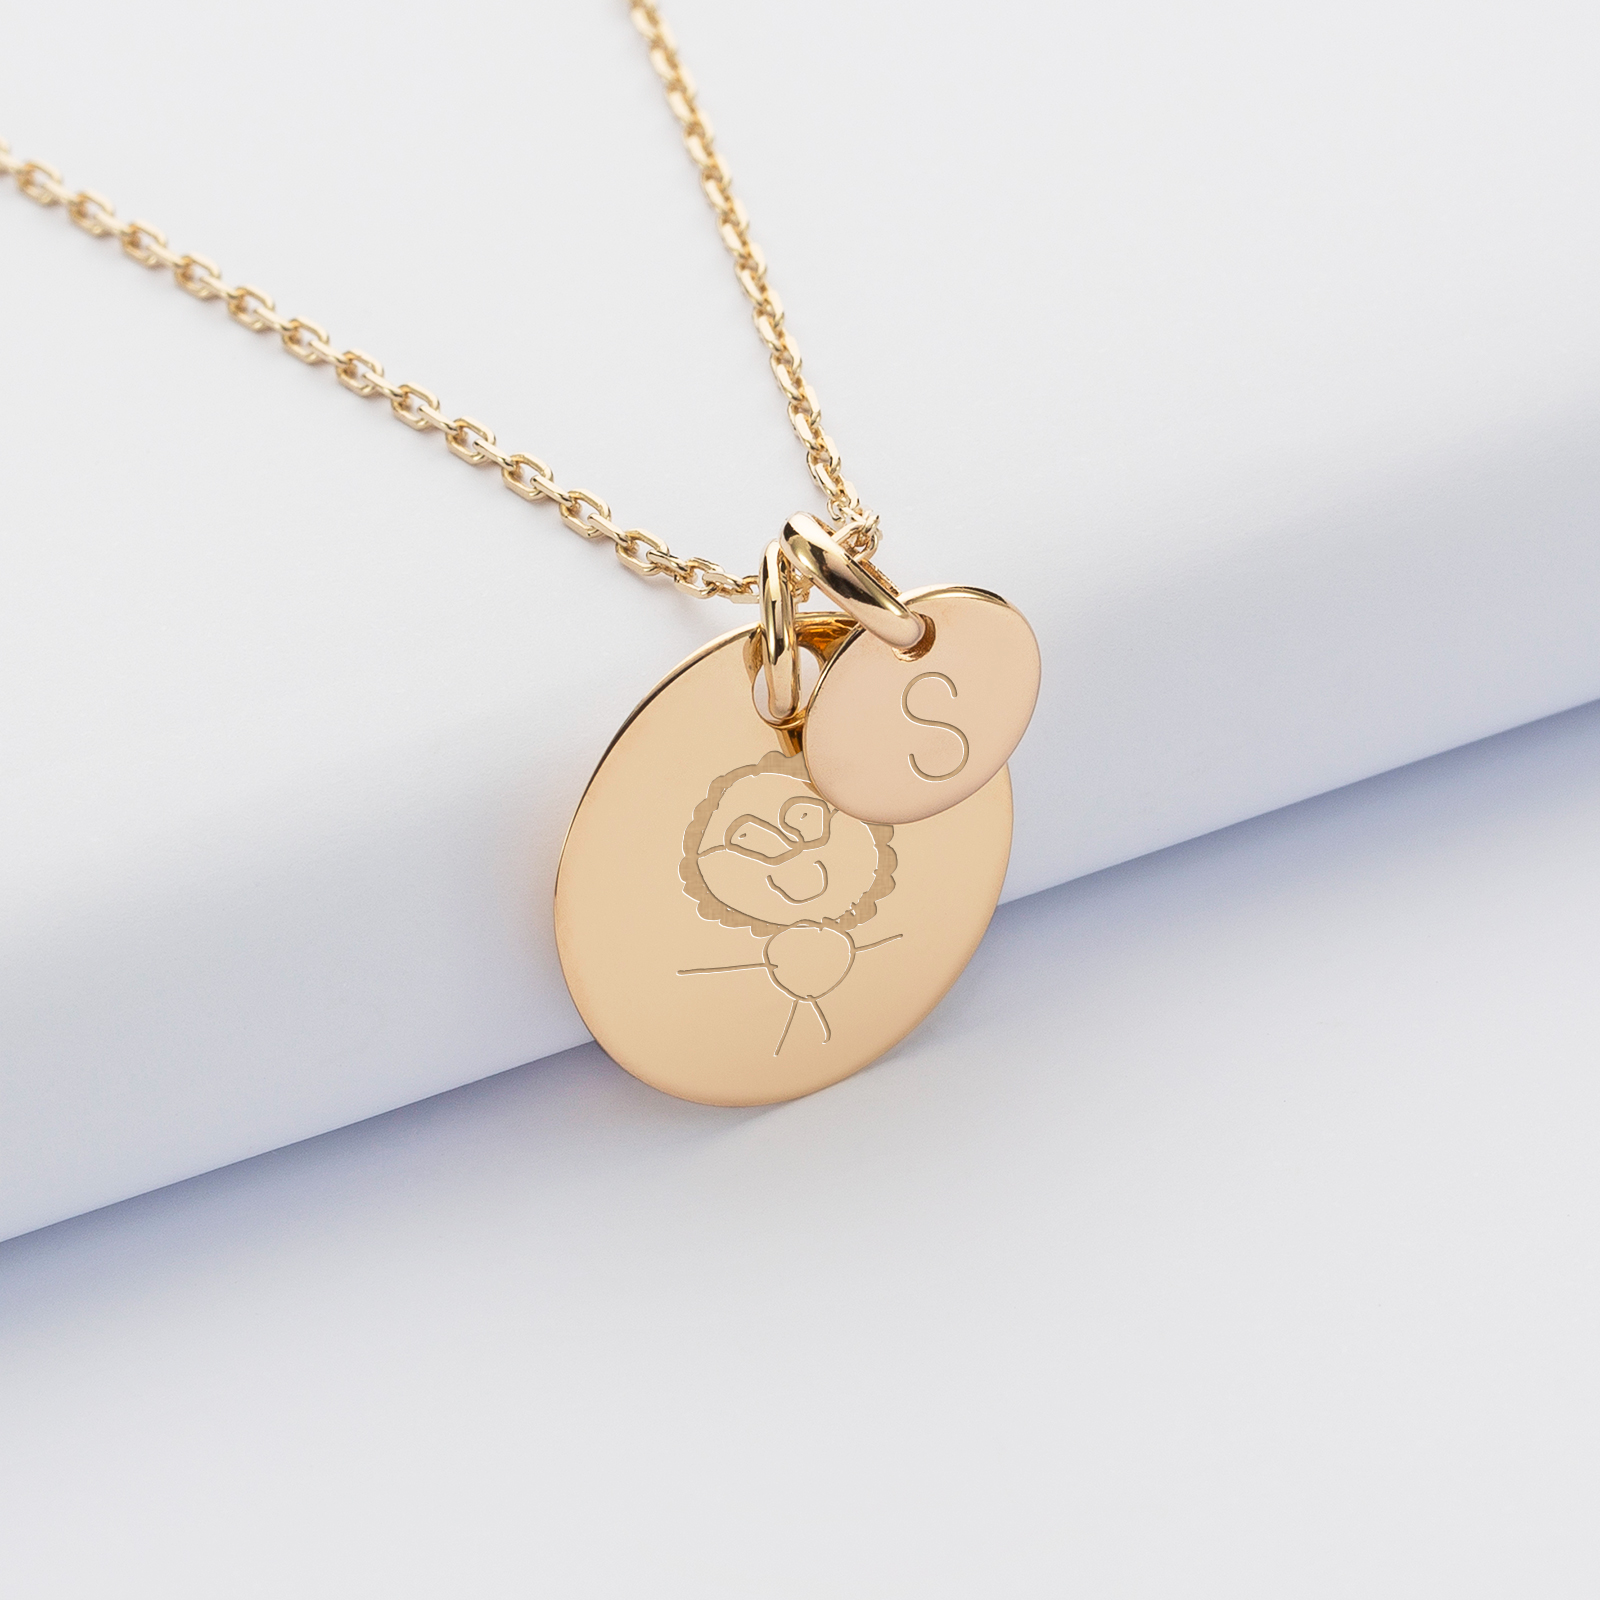 Personalised engraved gold-plated medallion pendant 19mm and round charm 10mm sketch